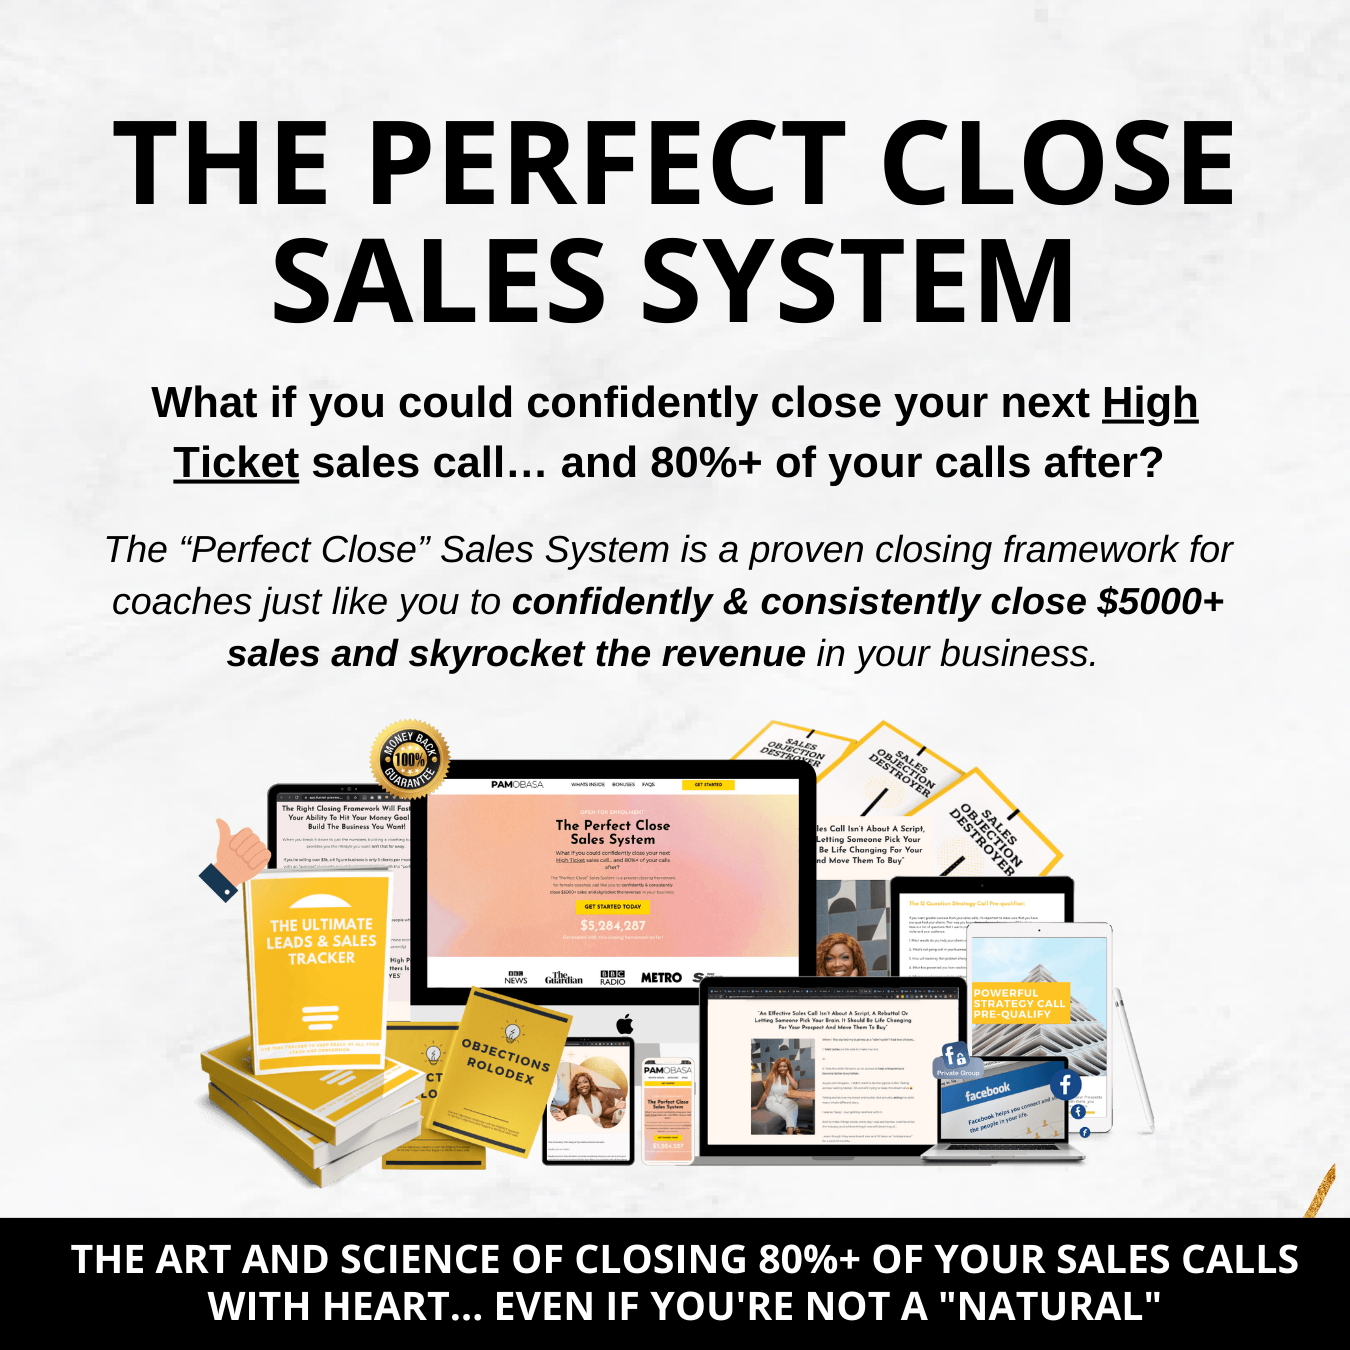 The Perfect Close Sales System